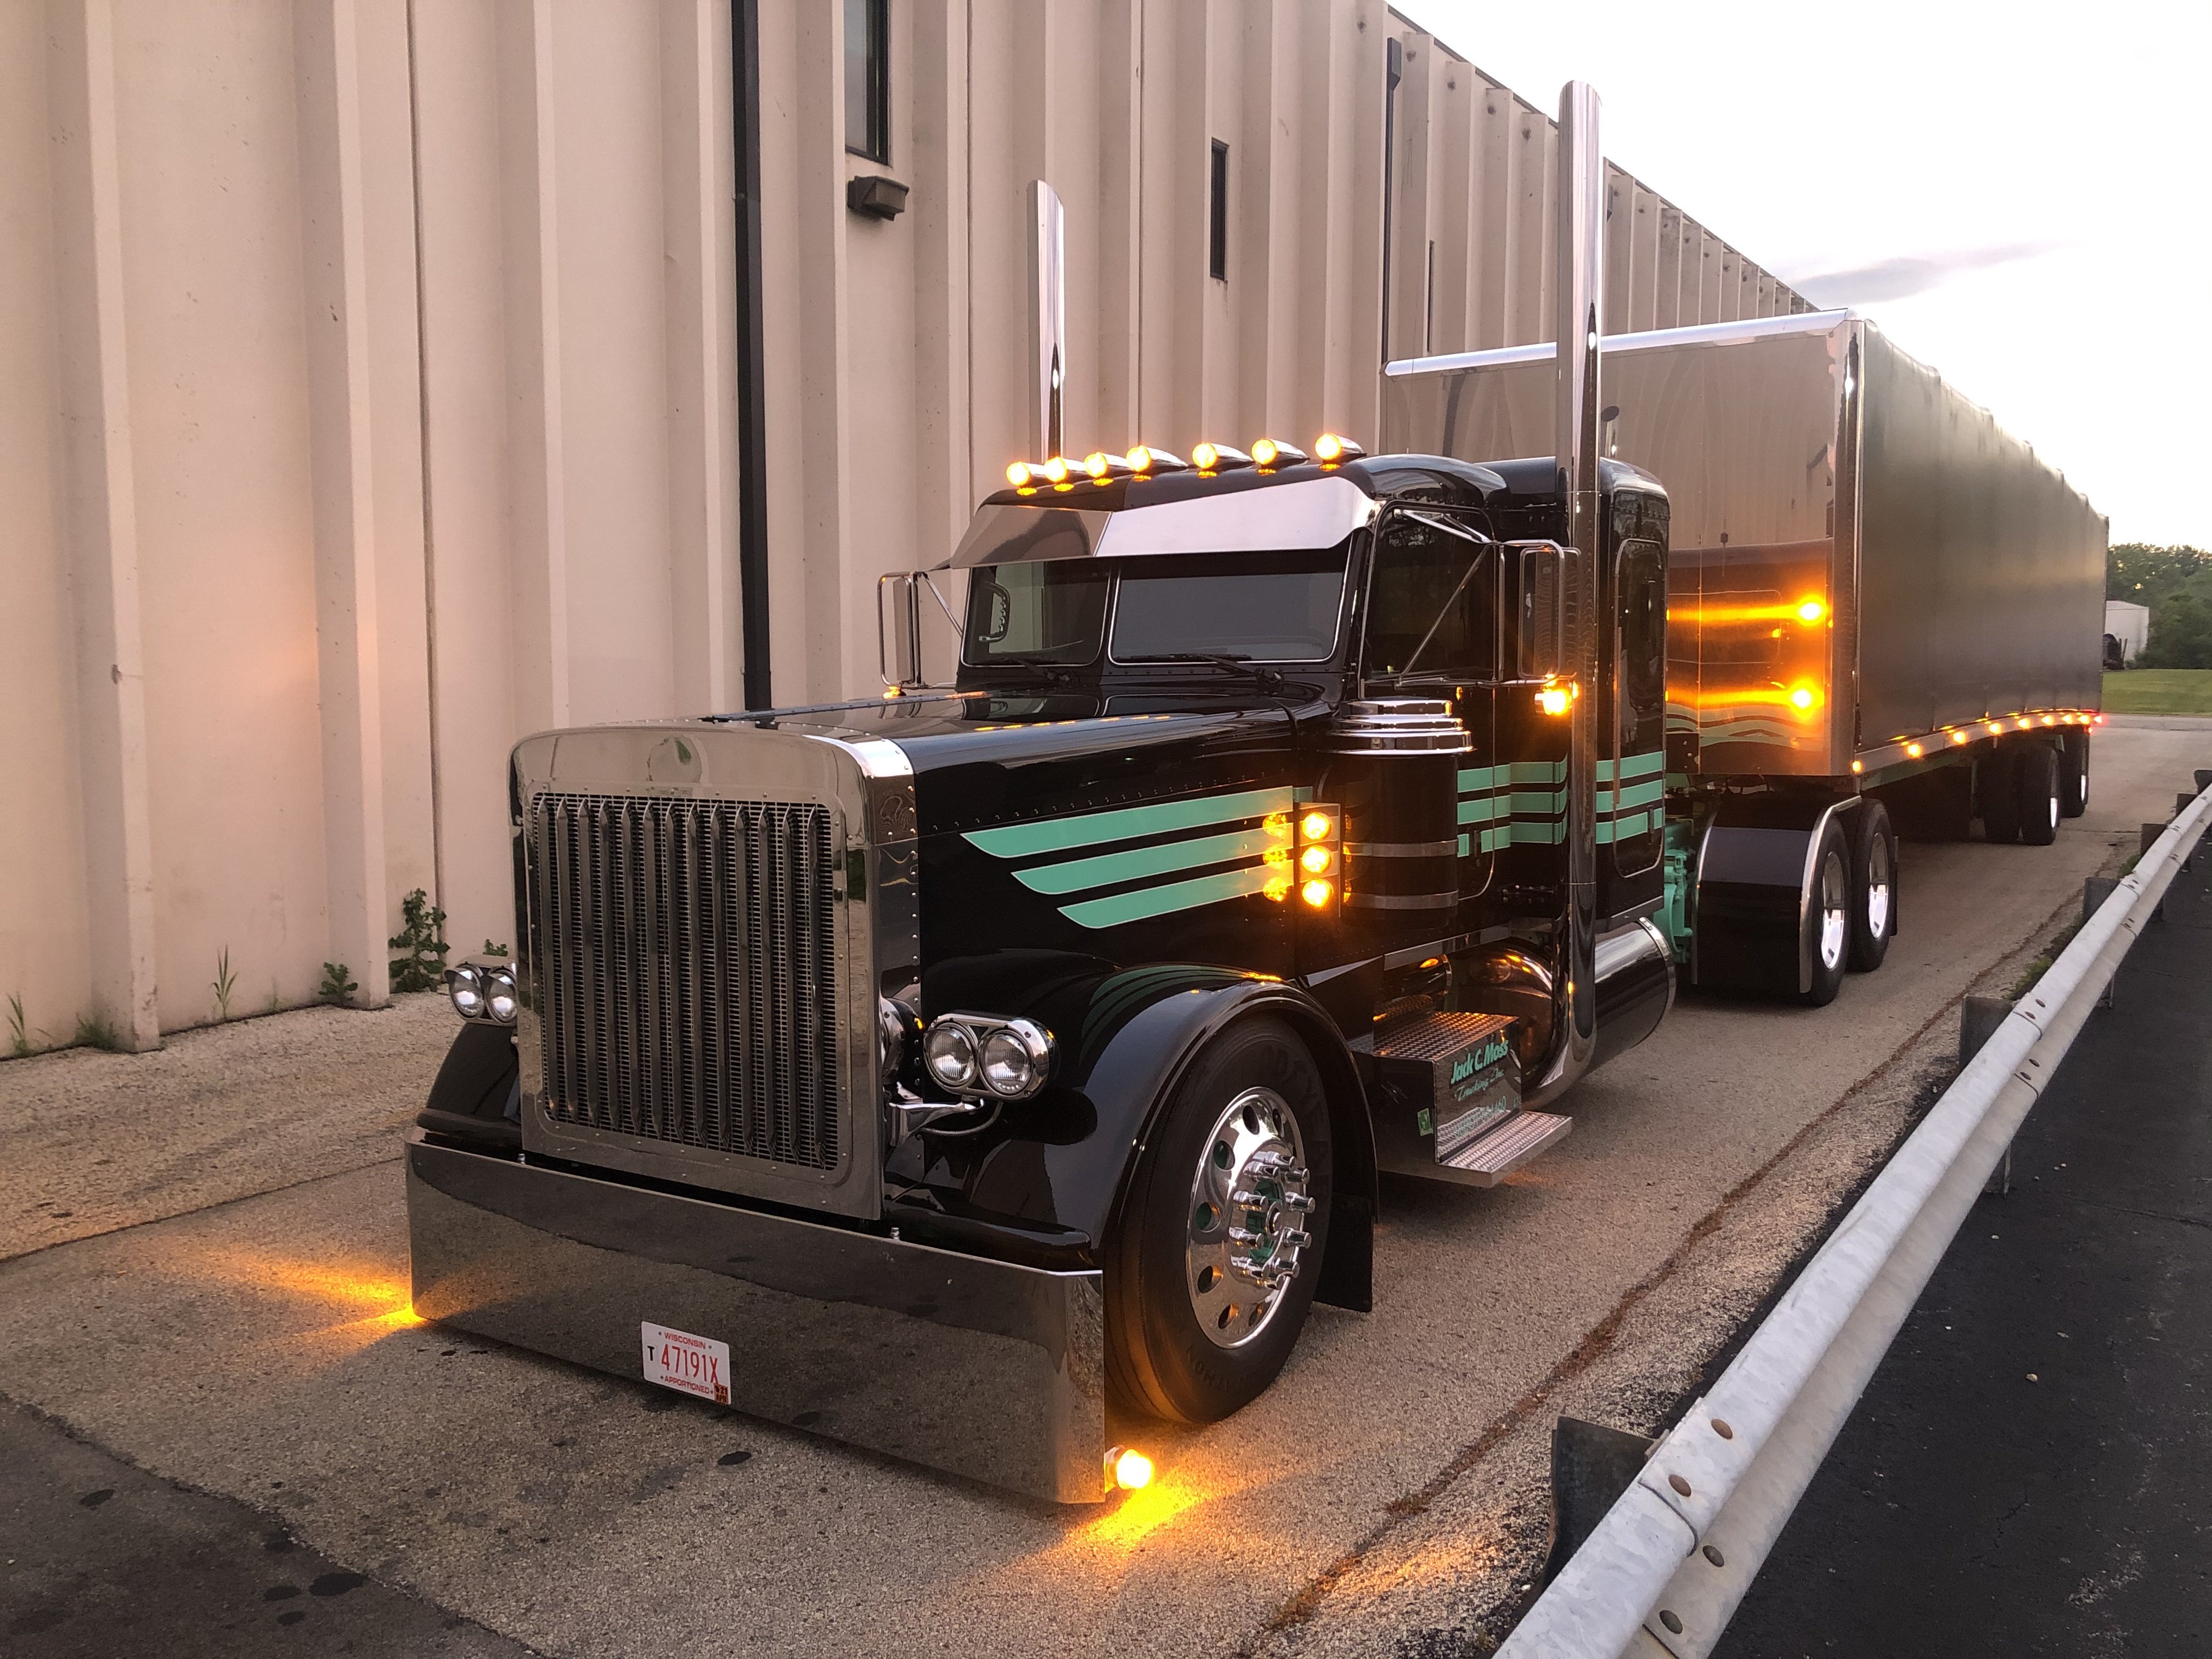 MyMilesMatter Shell Rotella SuperRigs 2022 Tractor Trailer Division